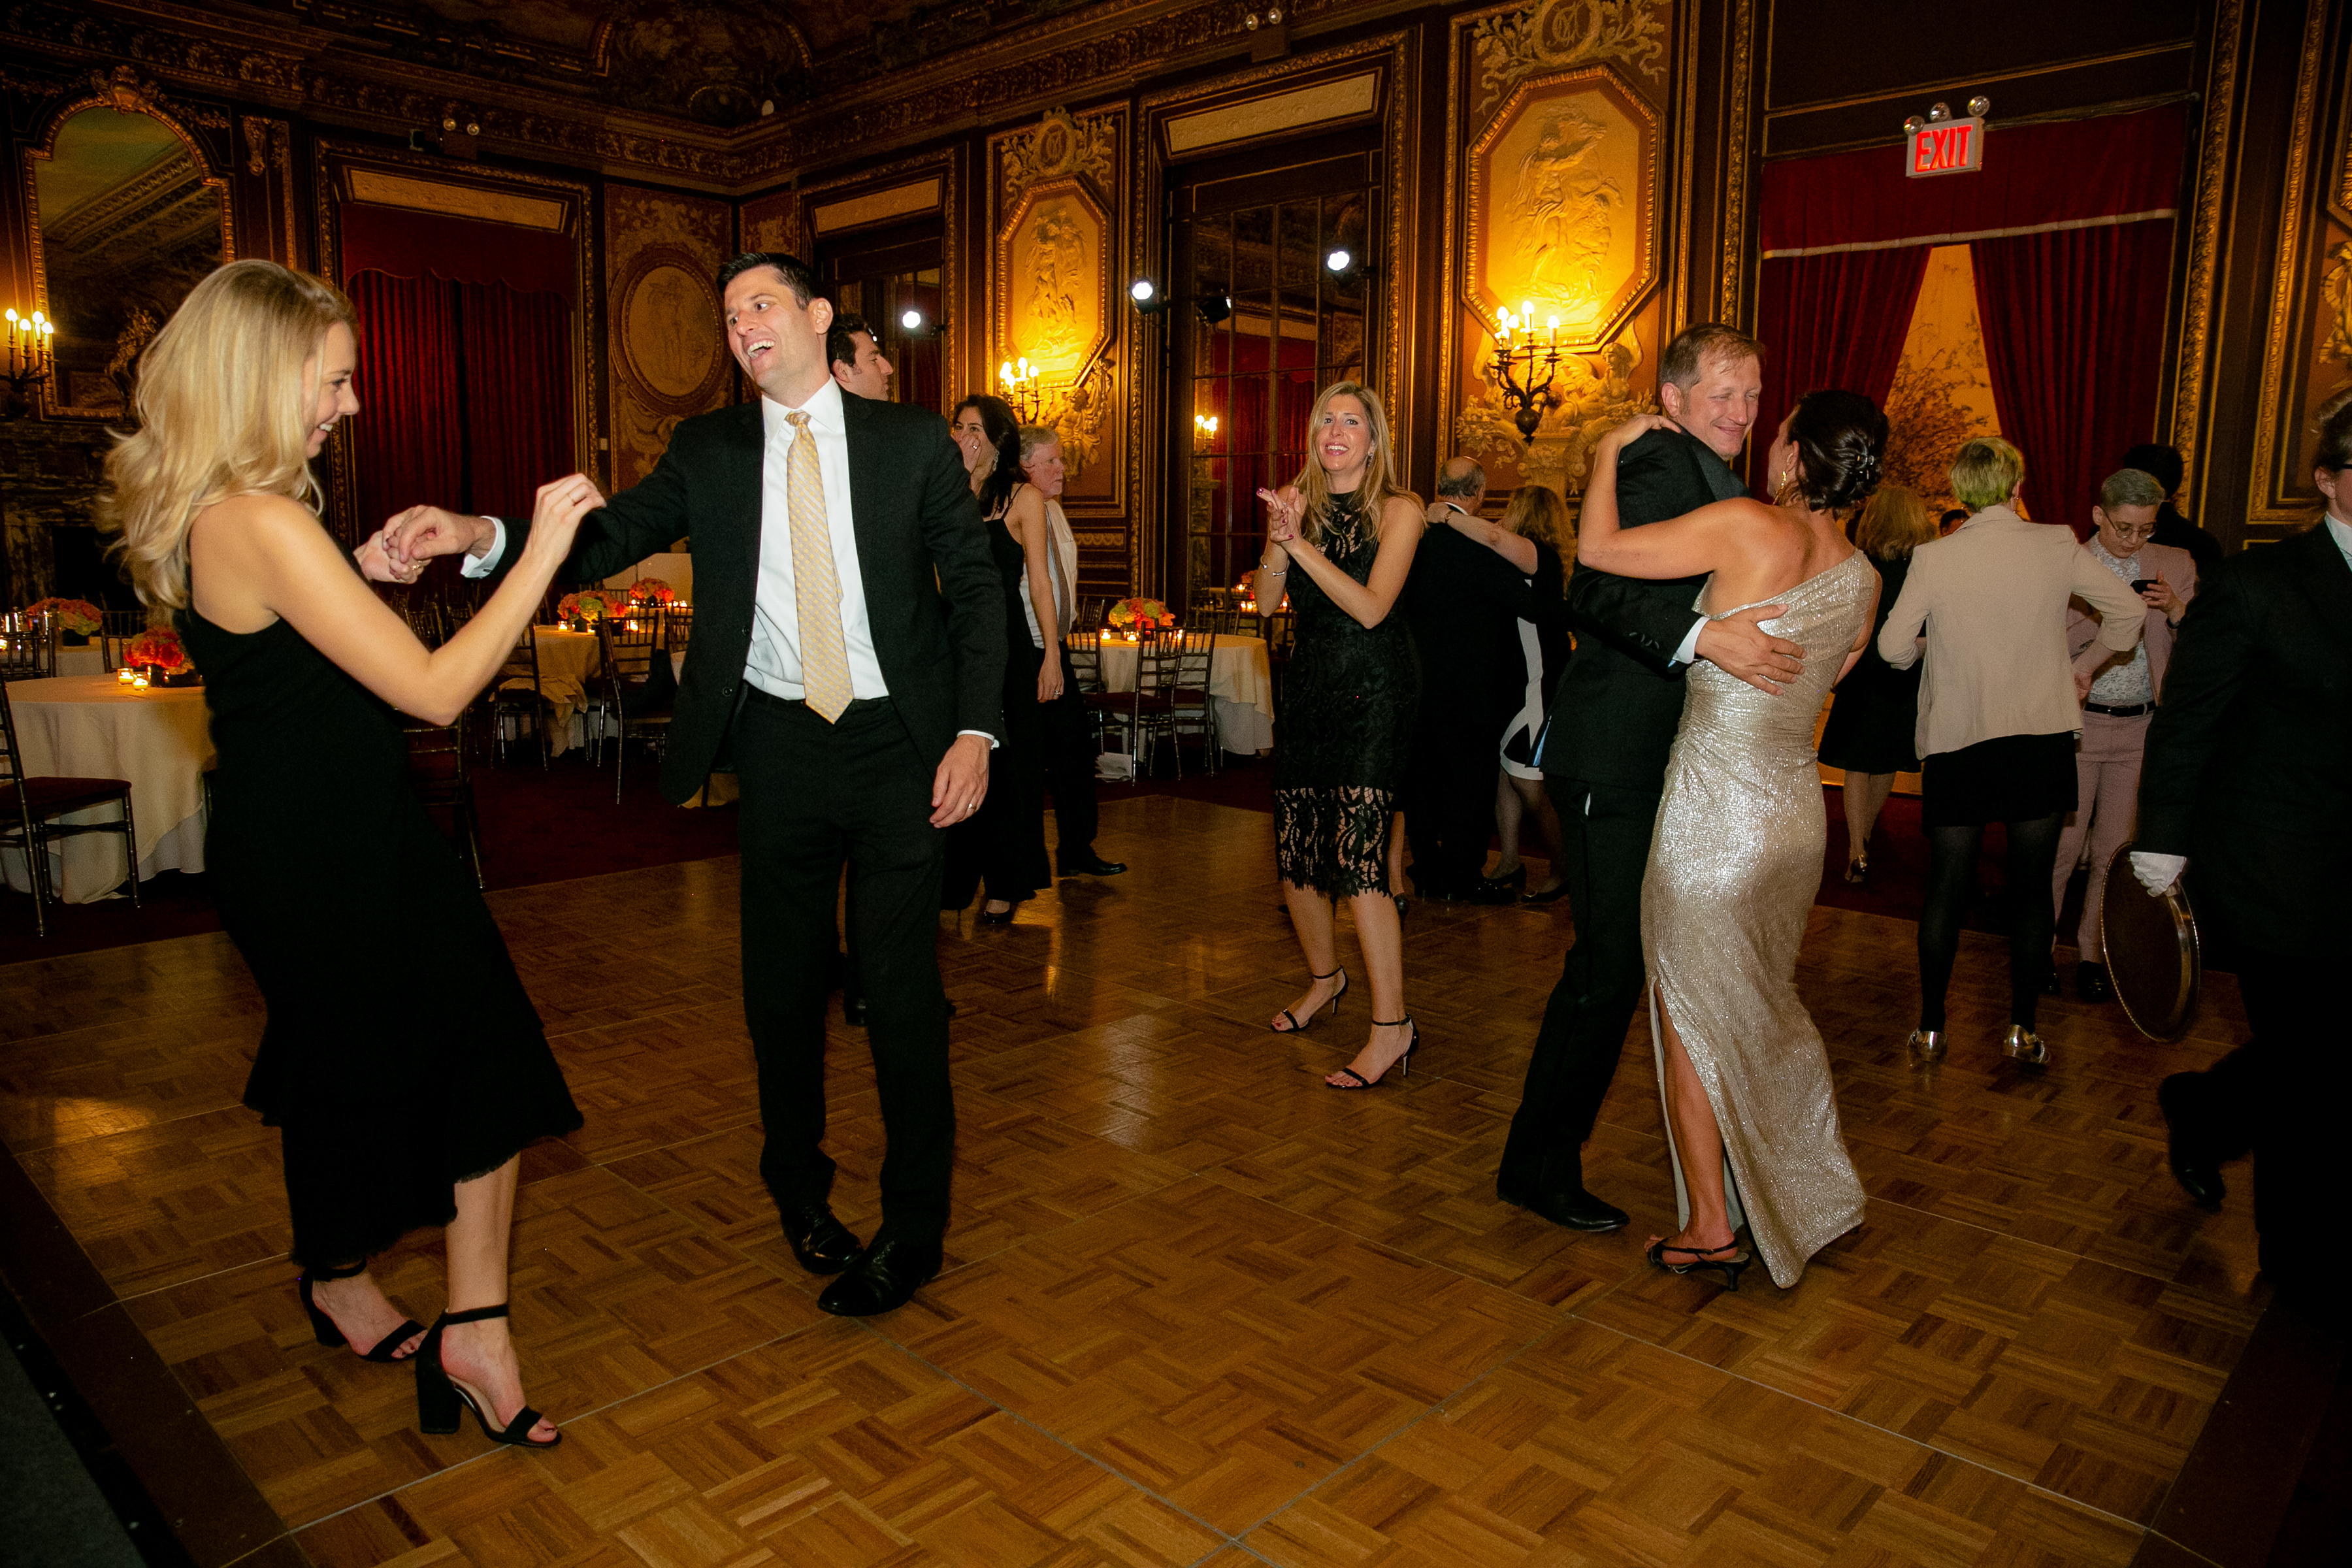 Several people dancing together or alone during 2019 Gala